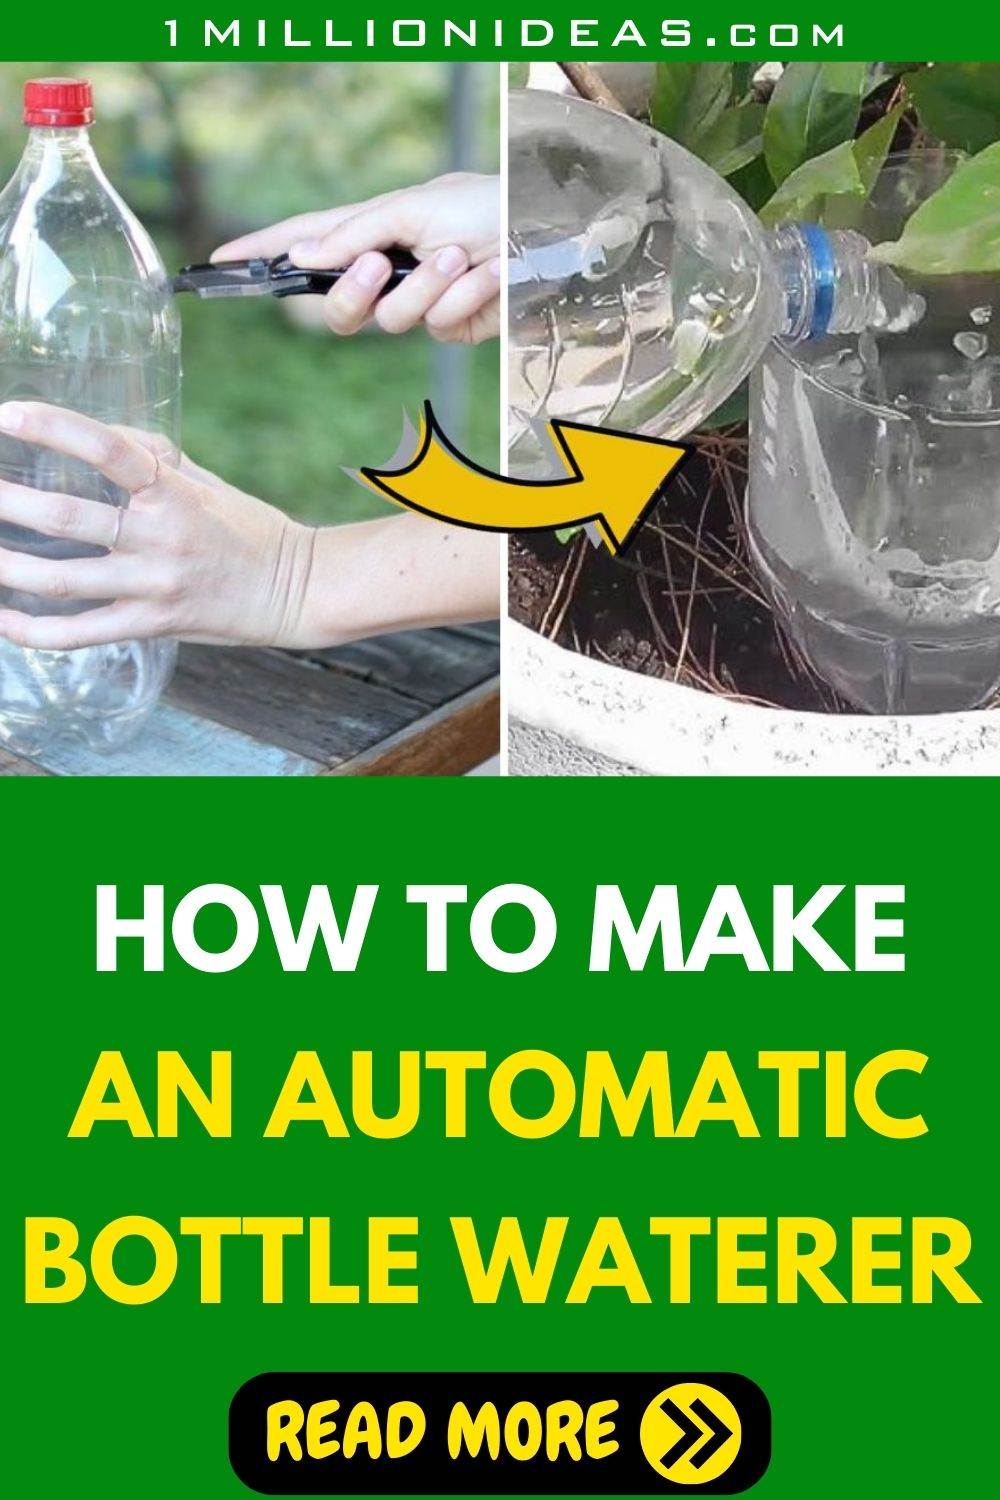 6 Steps To Craft A DIY Automatic Bottle Vegetable Waterer - 89